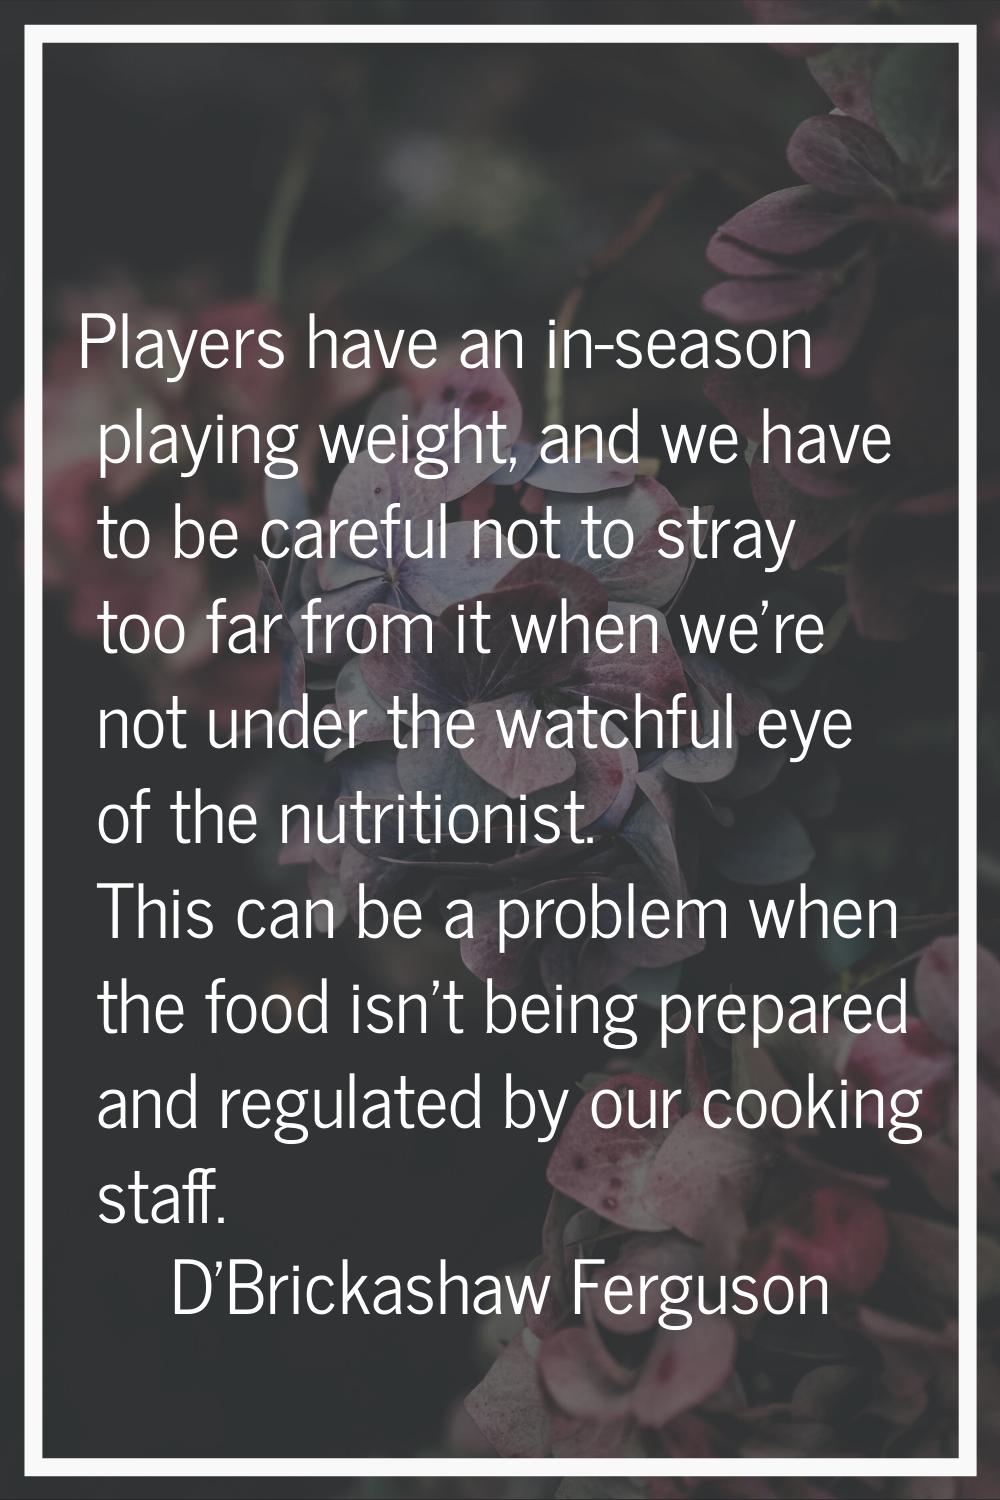 Players have an in-season playing weight, and we have to be careful not to stray too far from it wh